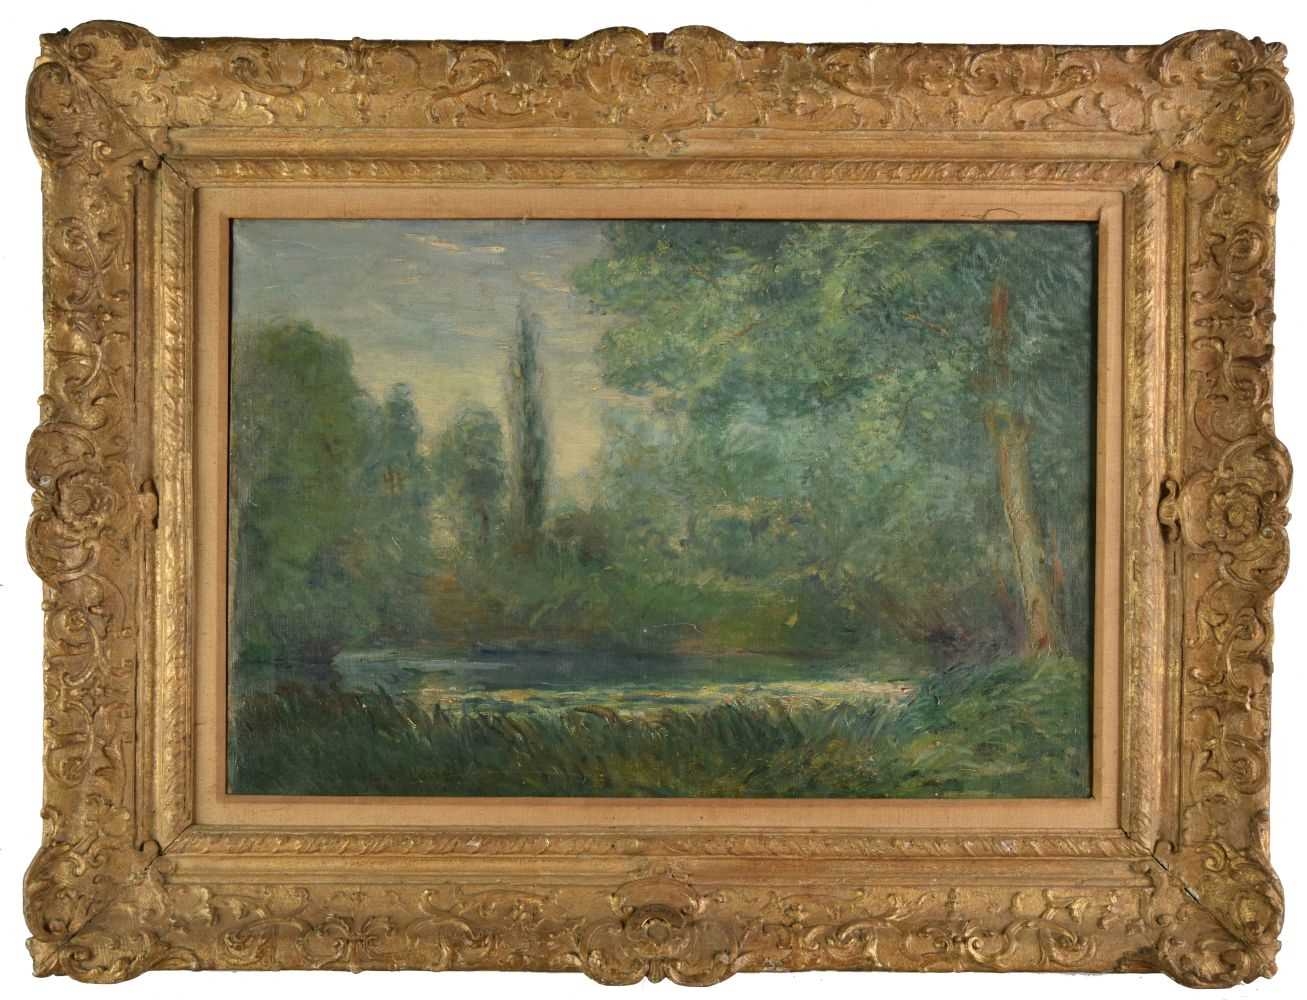 Landscape with Pool by Claude Monet, 1900